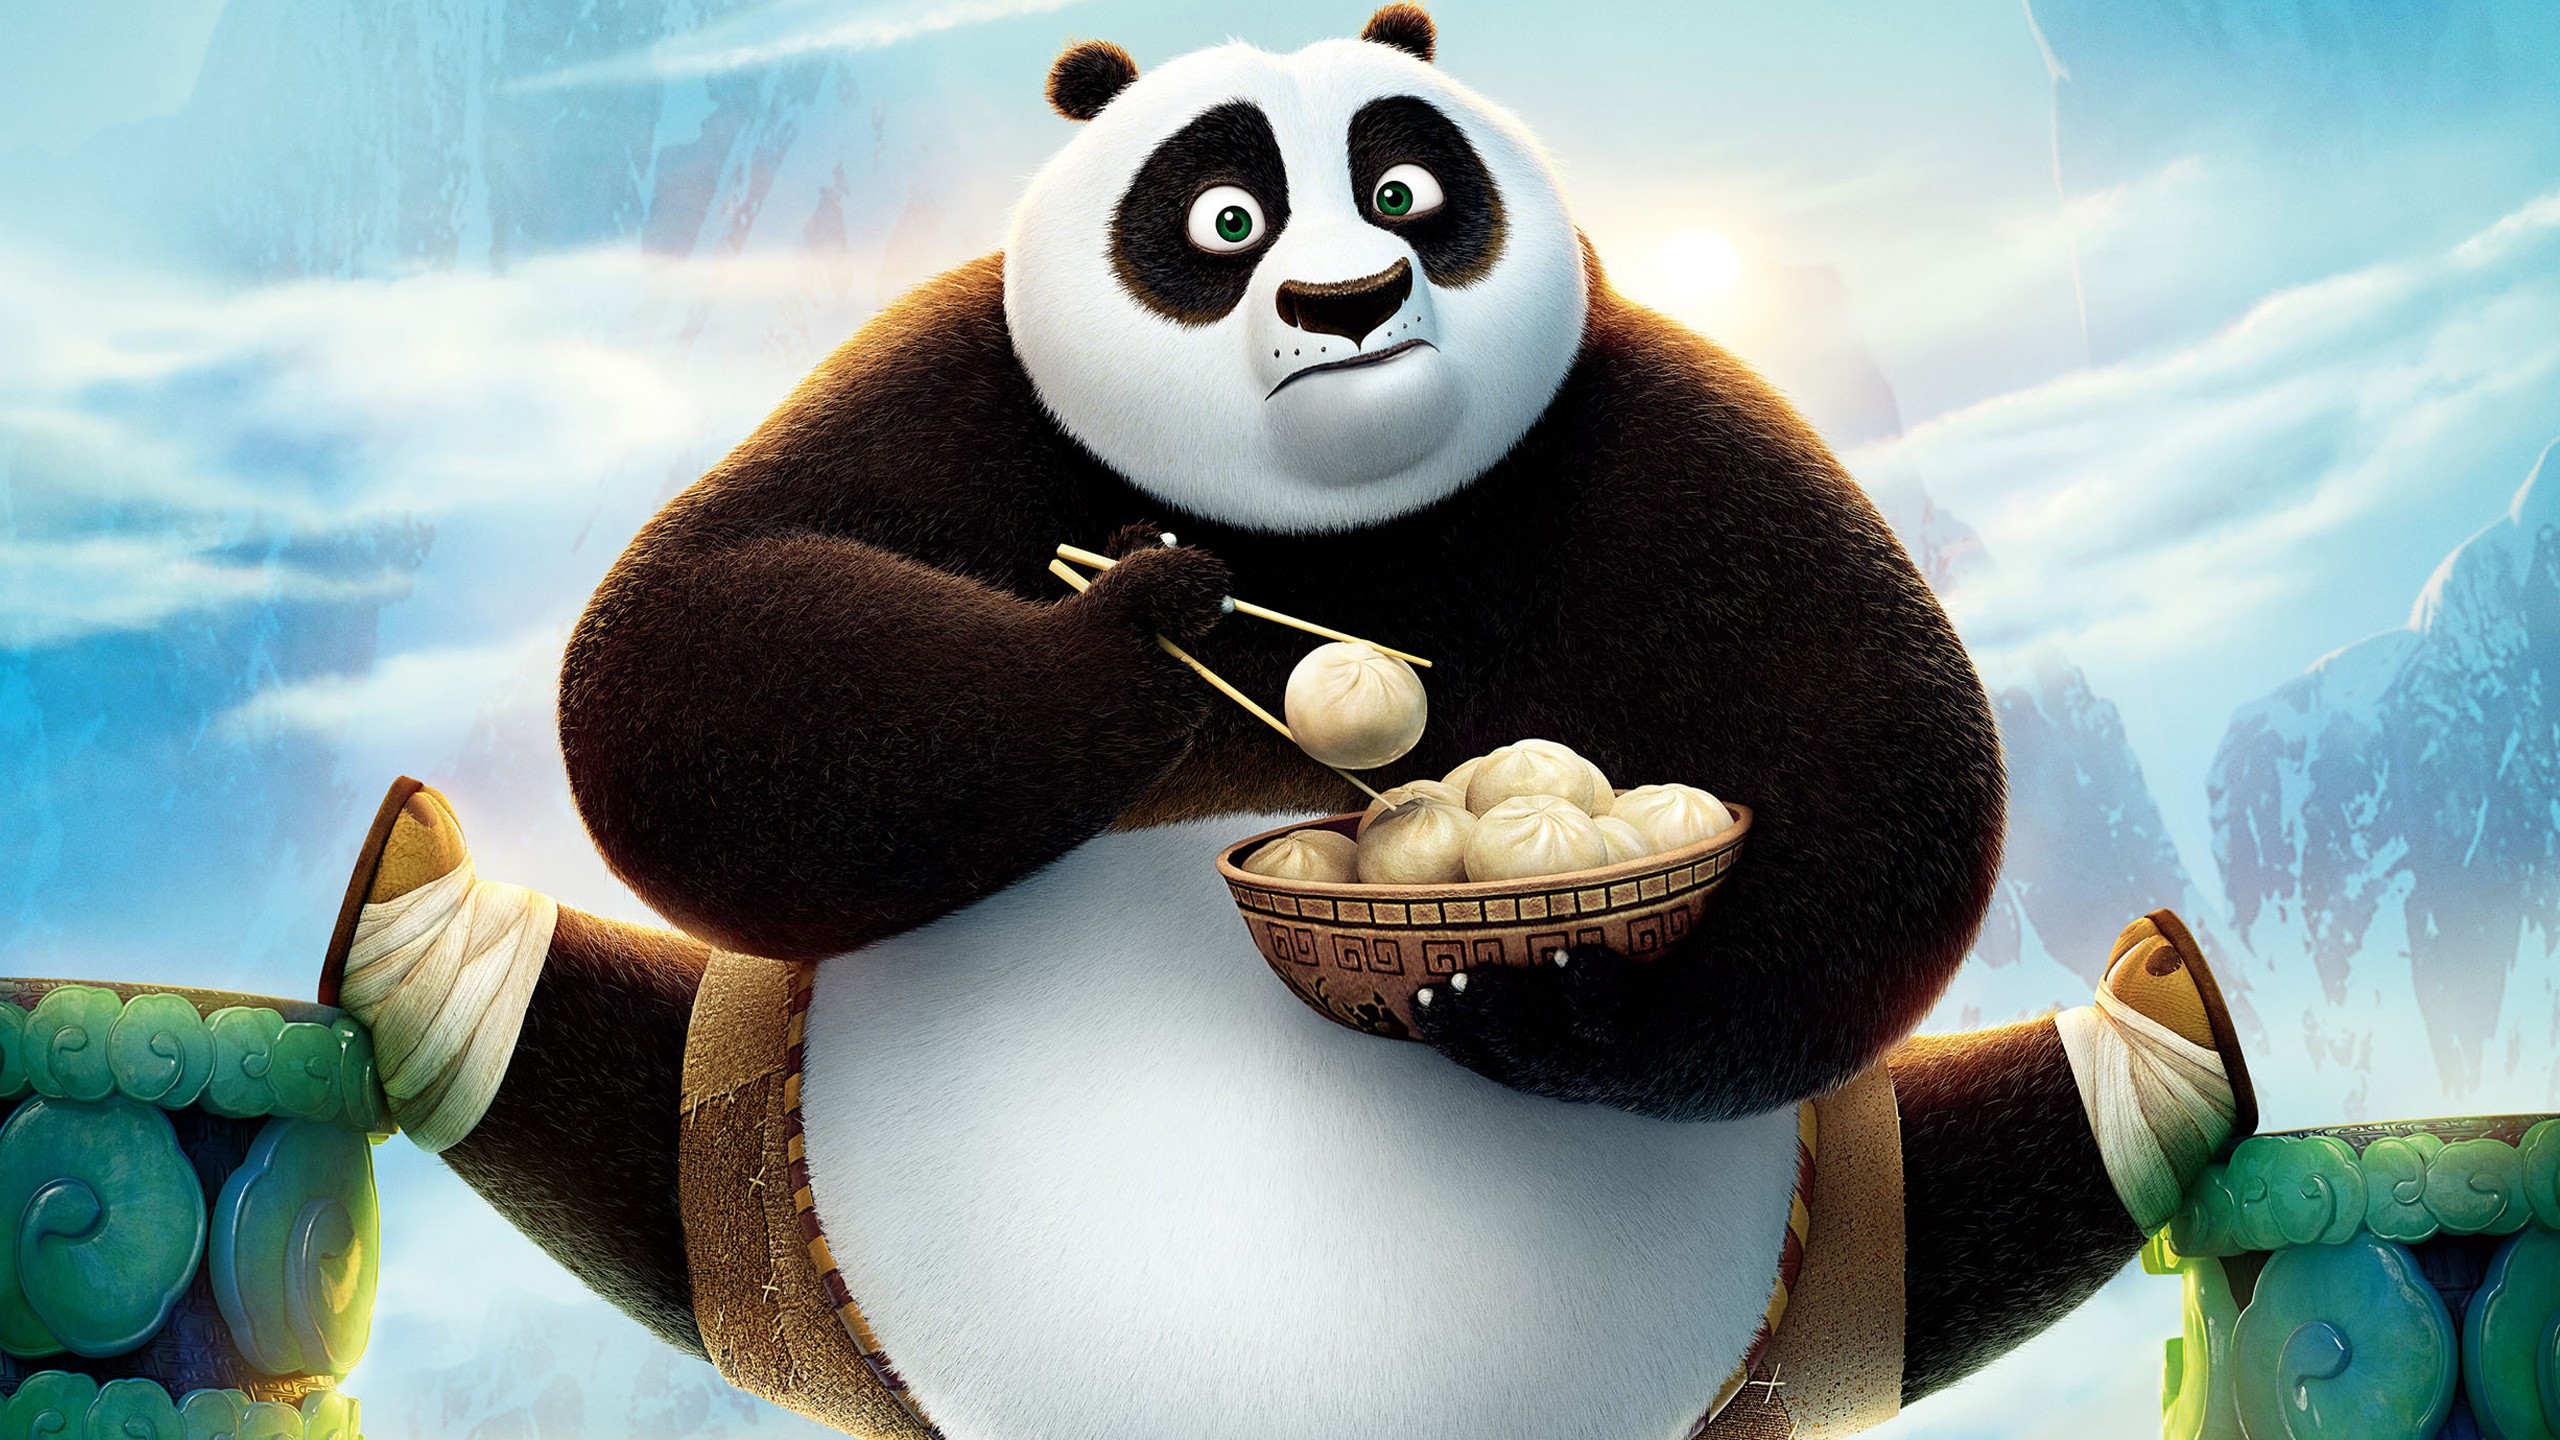 Kung Fu Panda 3 karate-kicks the competition with $41M